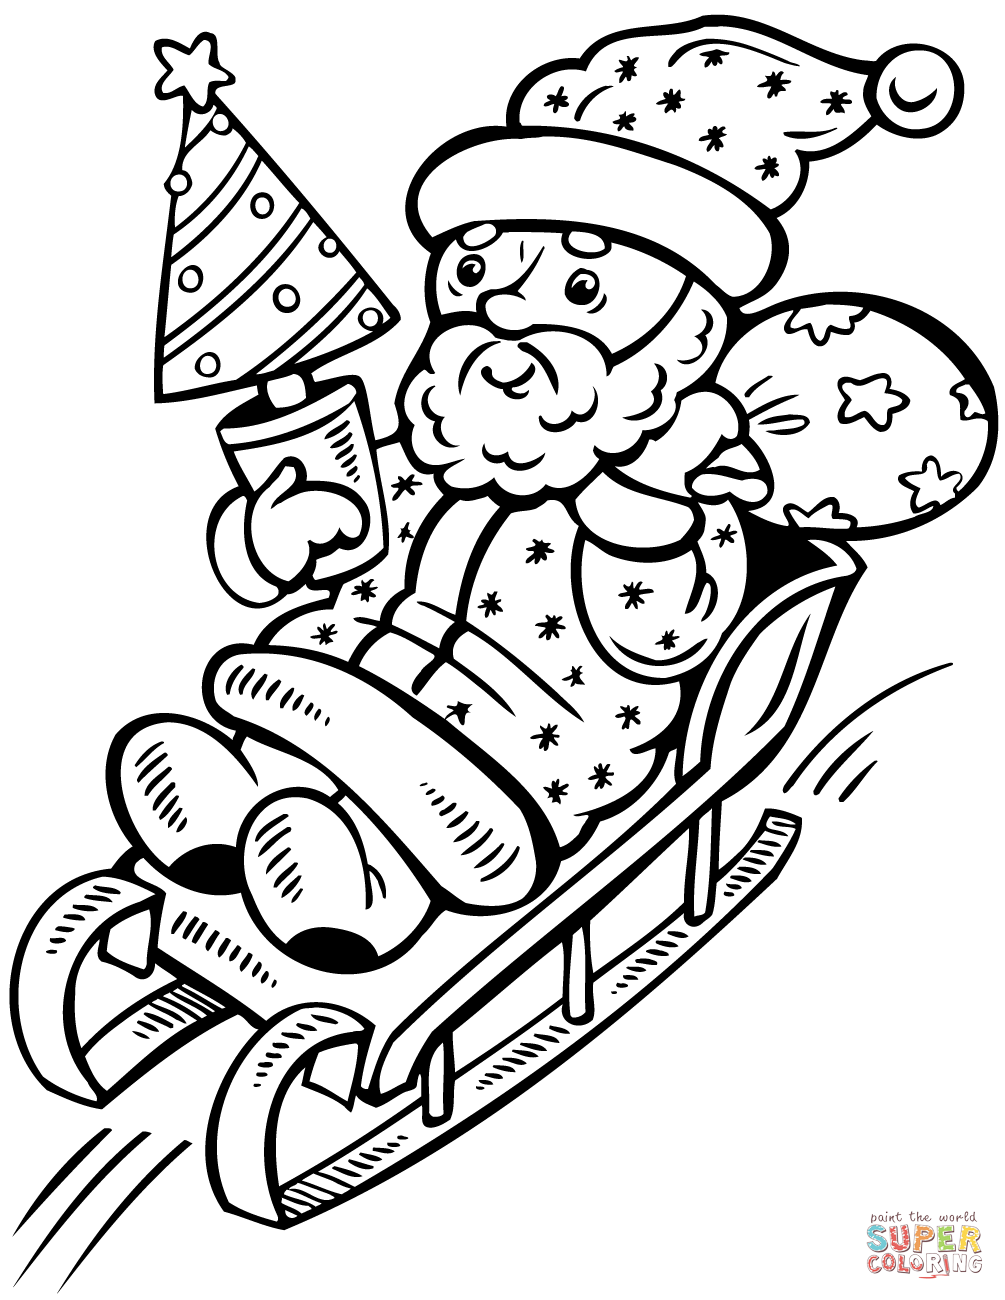 Santa claus on sleigh with christmas tree coloring page free printable coloring pages